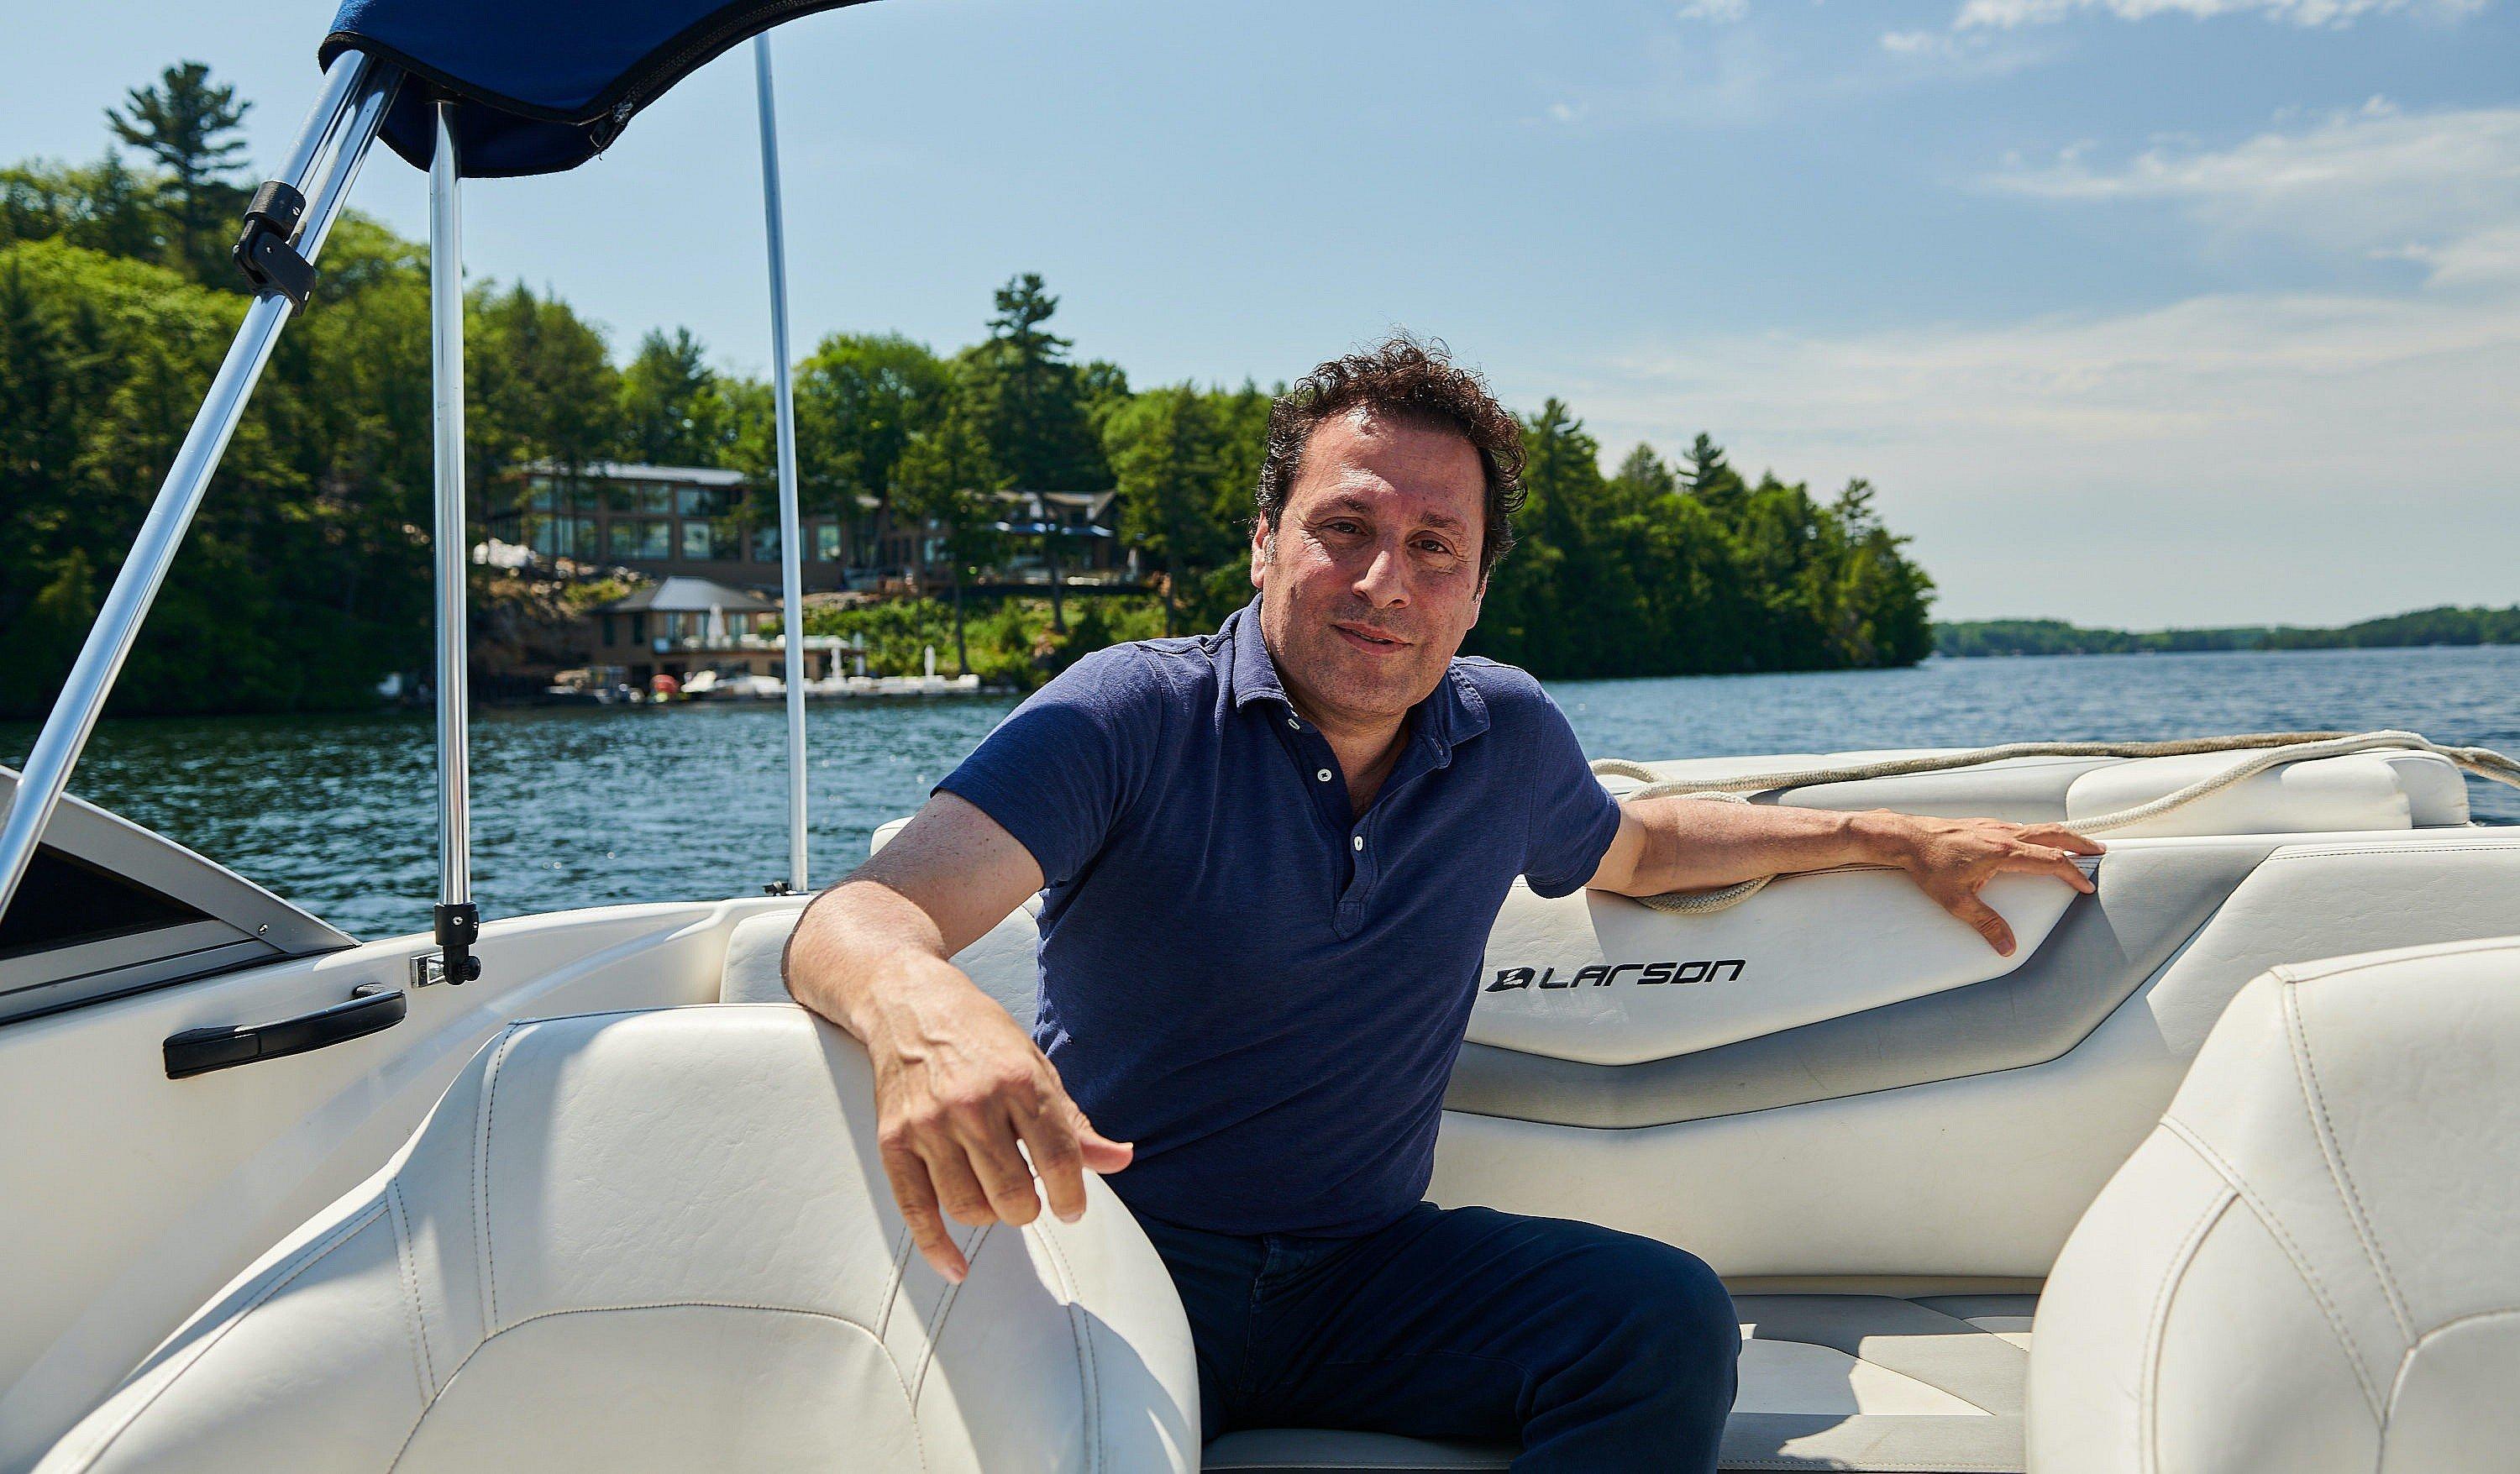 Azouri runs a thriving real estate development company in Toronto, but he's kept a relatively low profile. That changed when he bought a property on Lake Joseph and set about remaking it. 